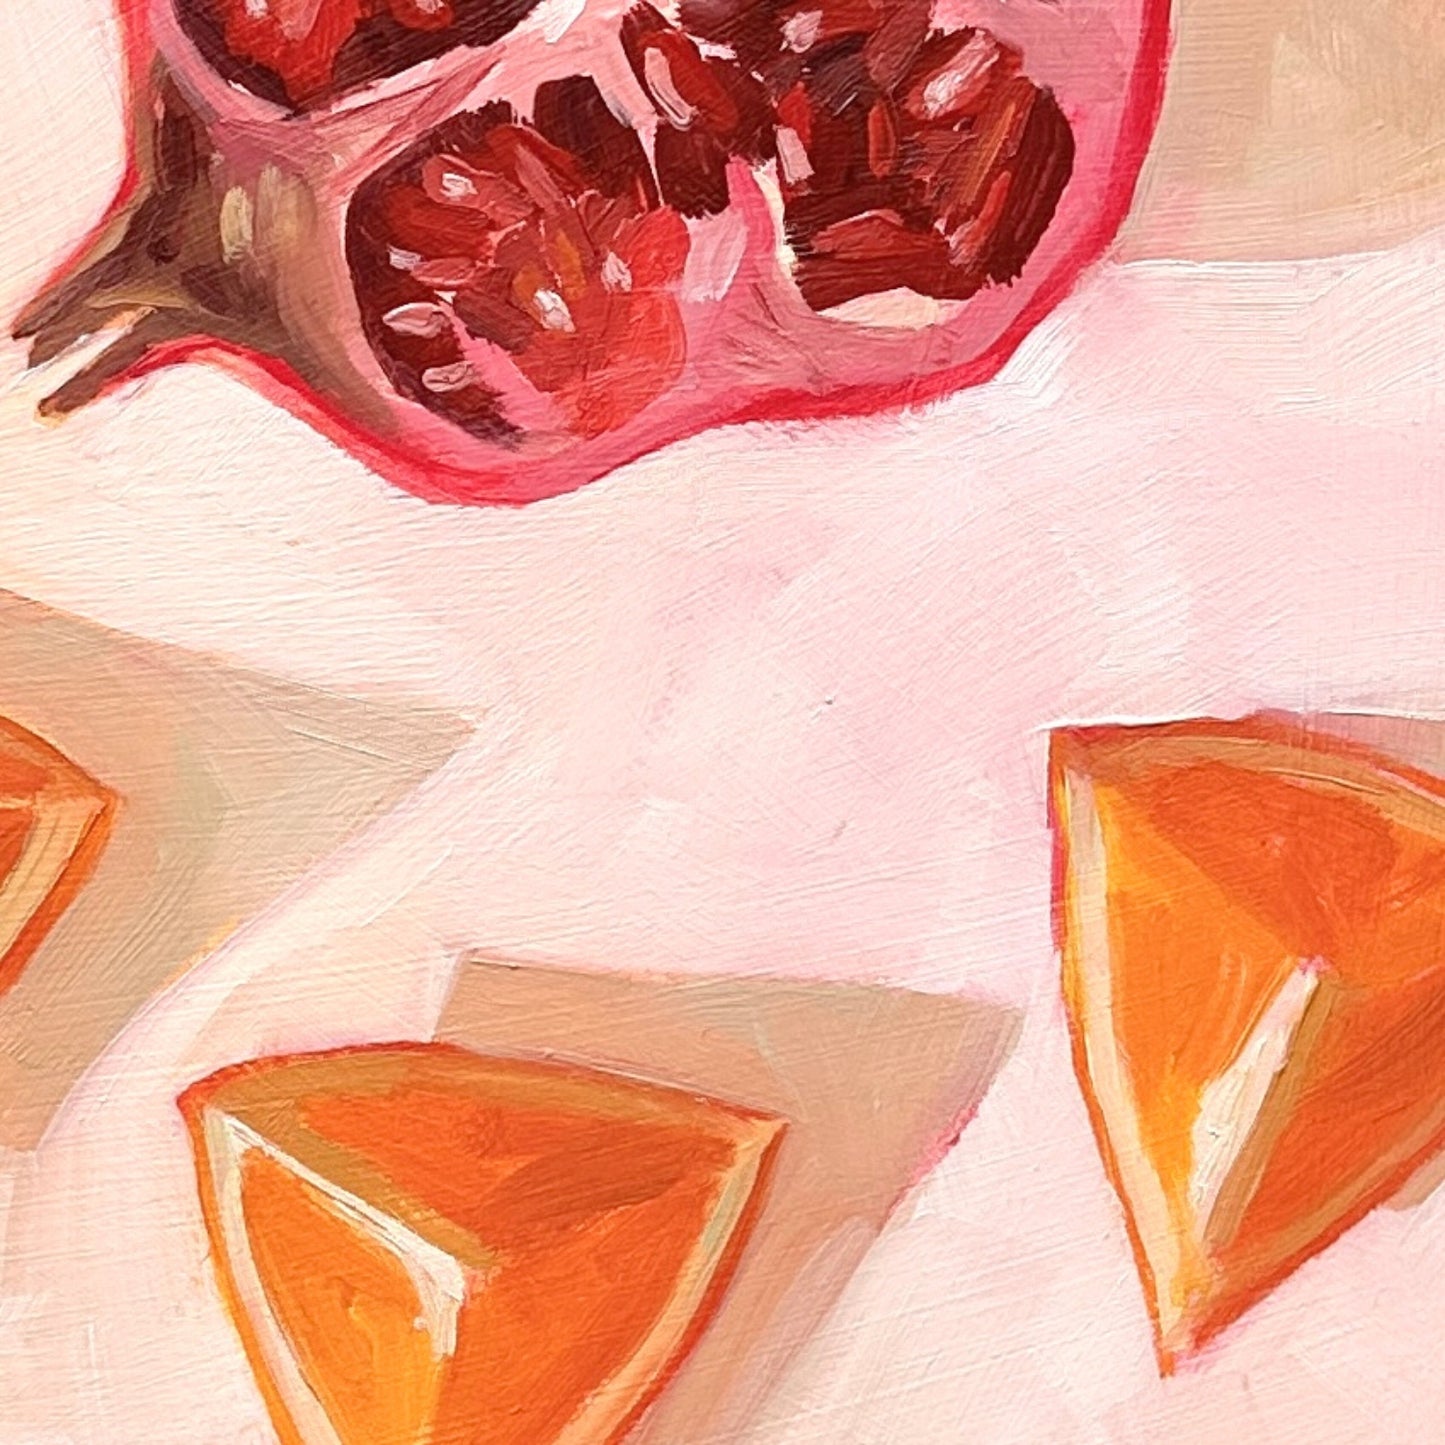 closeup of an impressionistic original oil painting of a still life setting of pomegranate fruit and three orange slices on a textured cream background with soft shadows